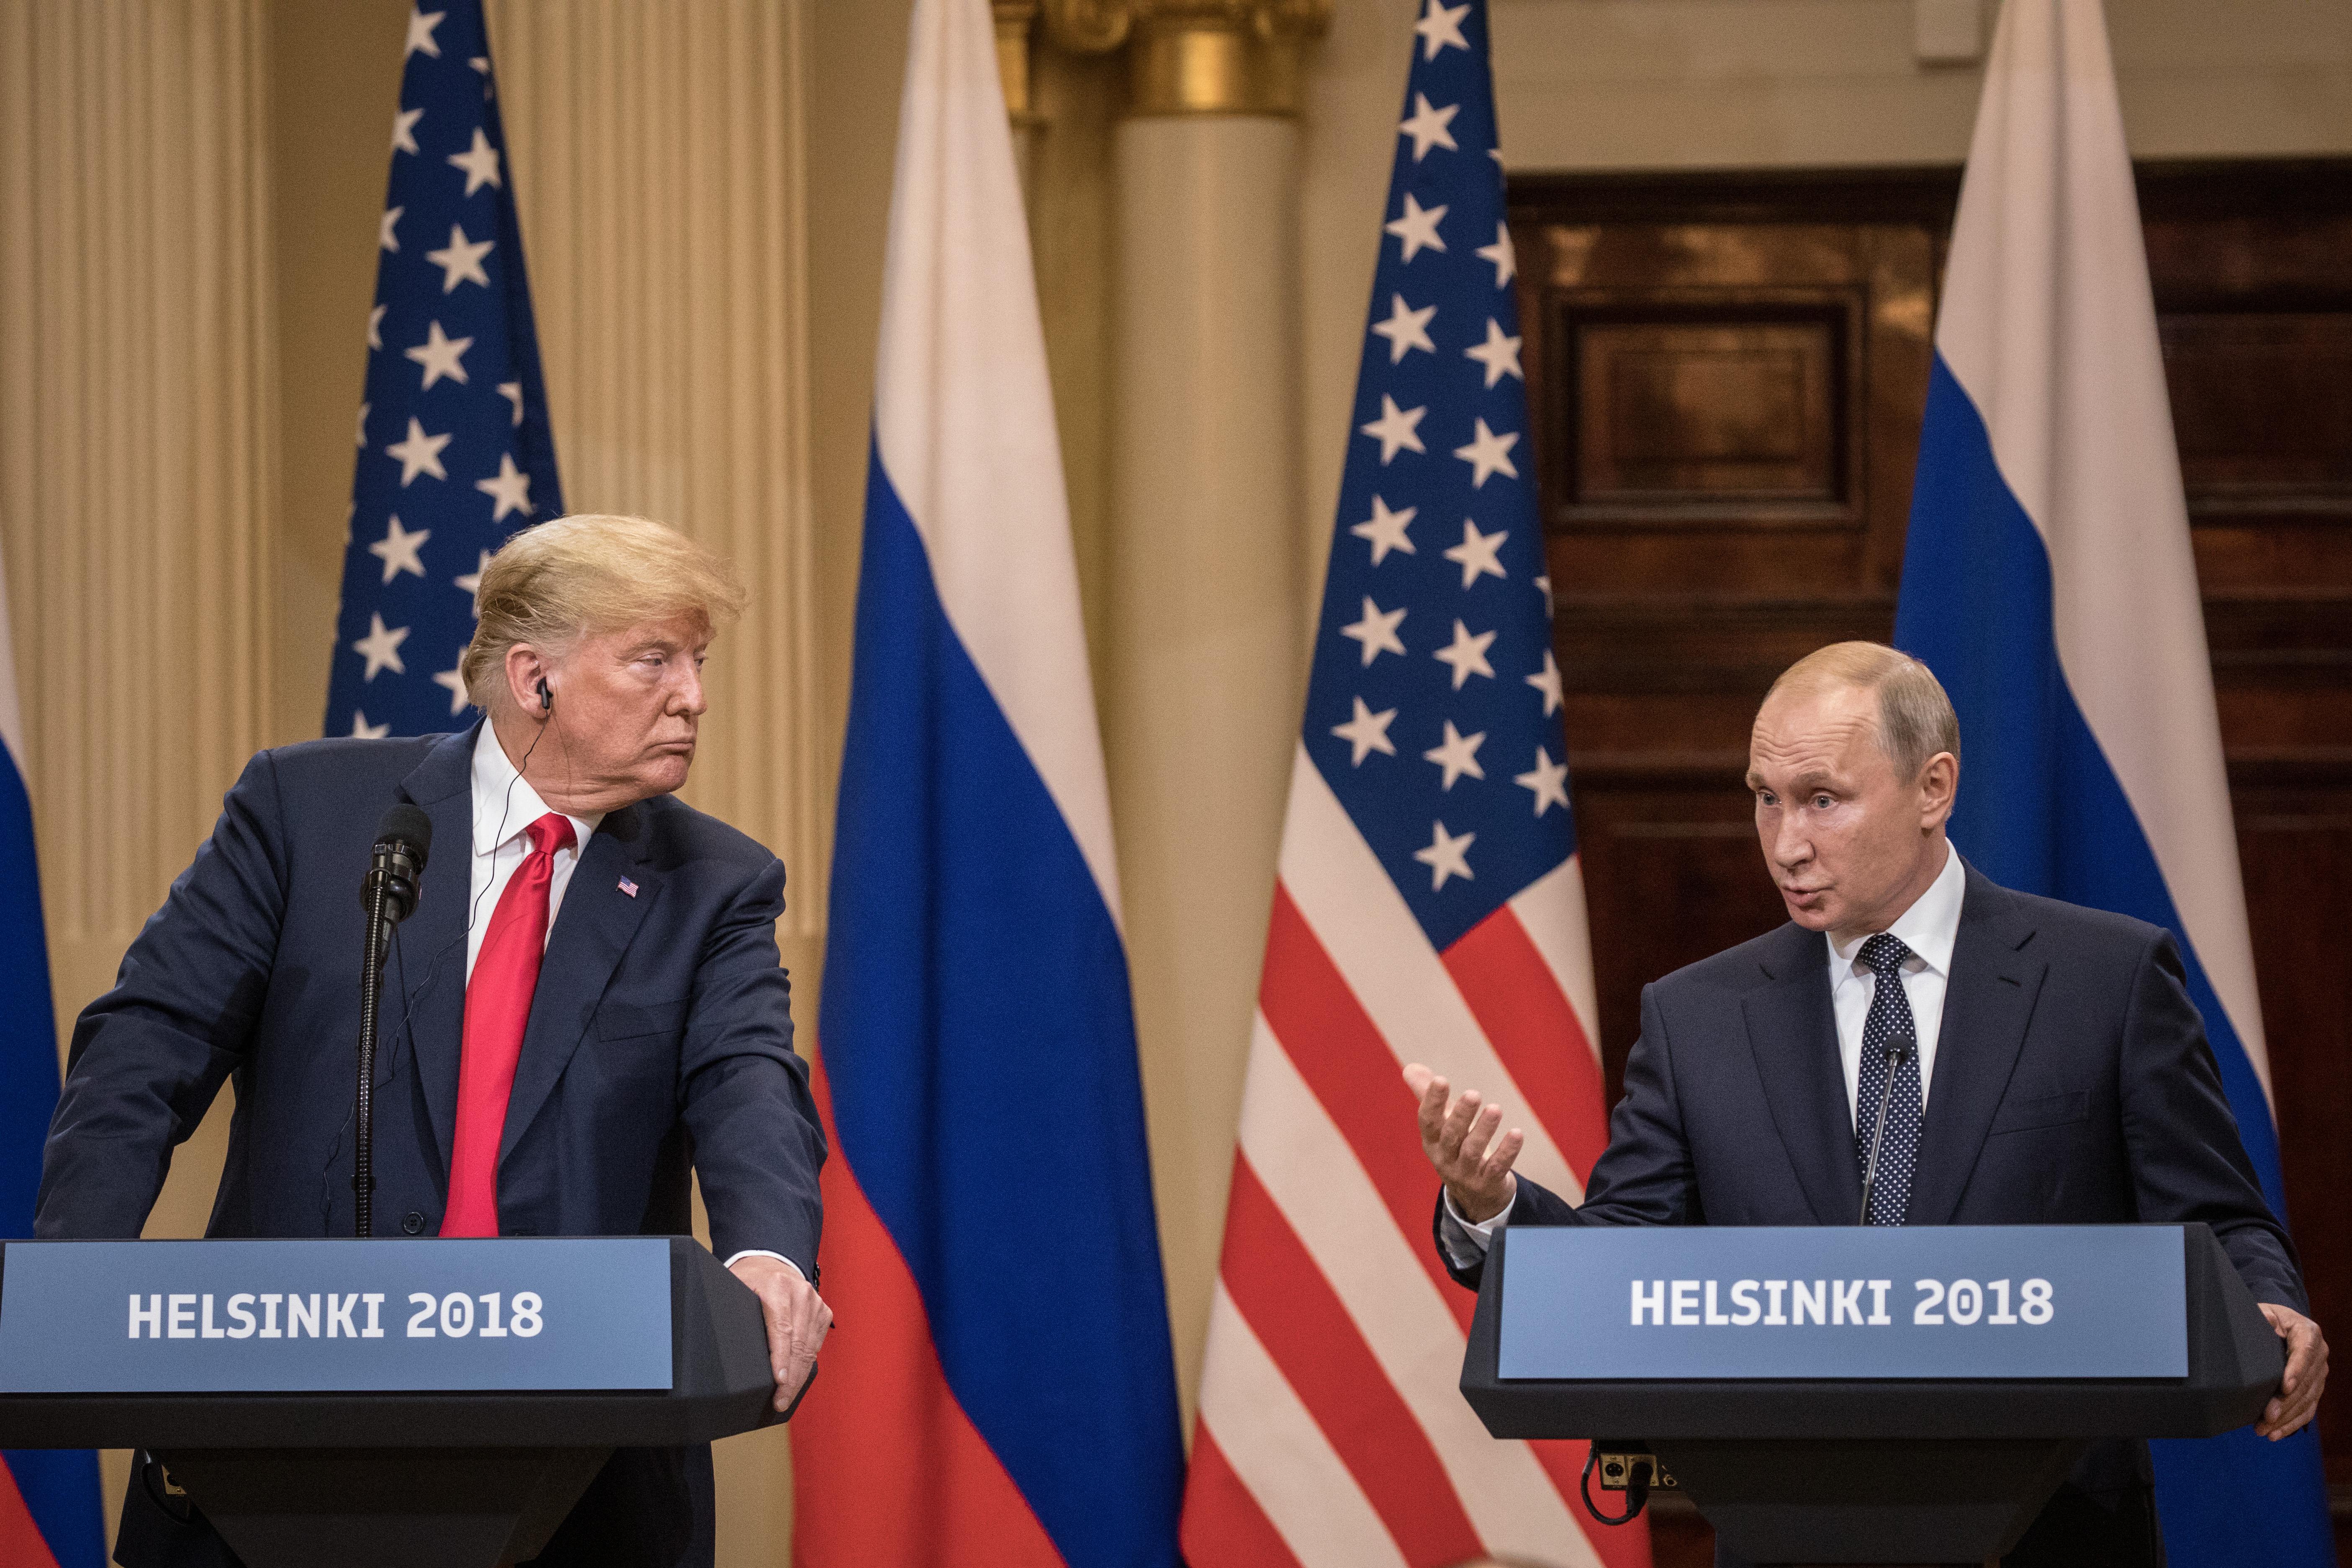 U.S. President Donald Trump and Russian President Vladimir Putin stand at podiums during a joint press conference after their summit on July 16 in Helsinki.